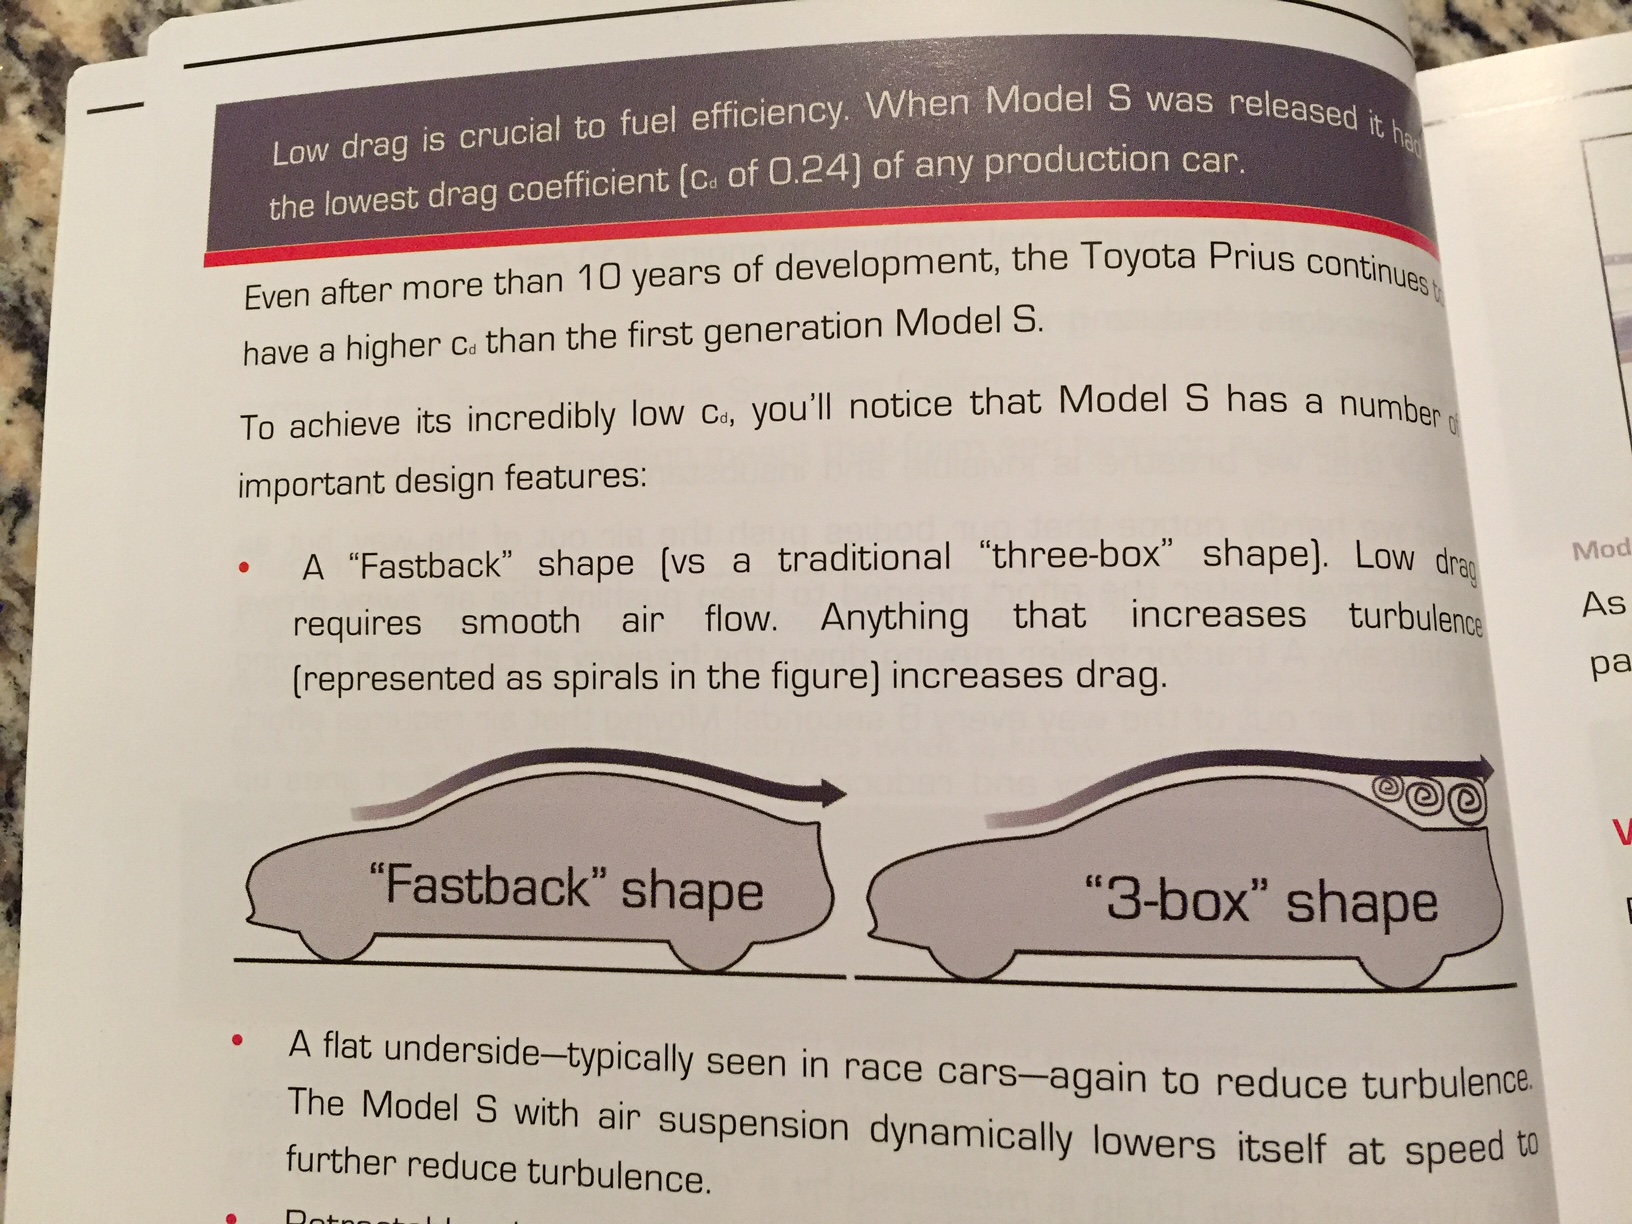 Owning Model S book insights